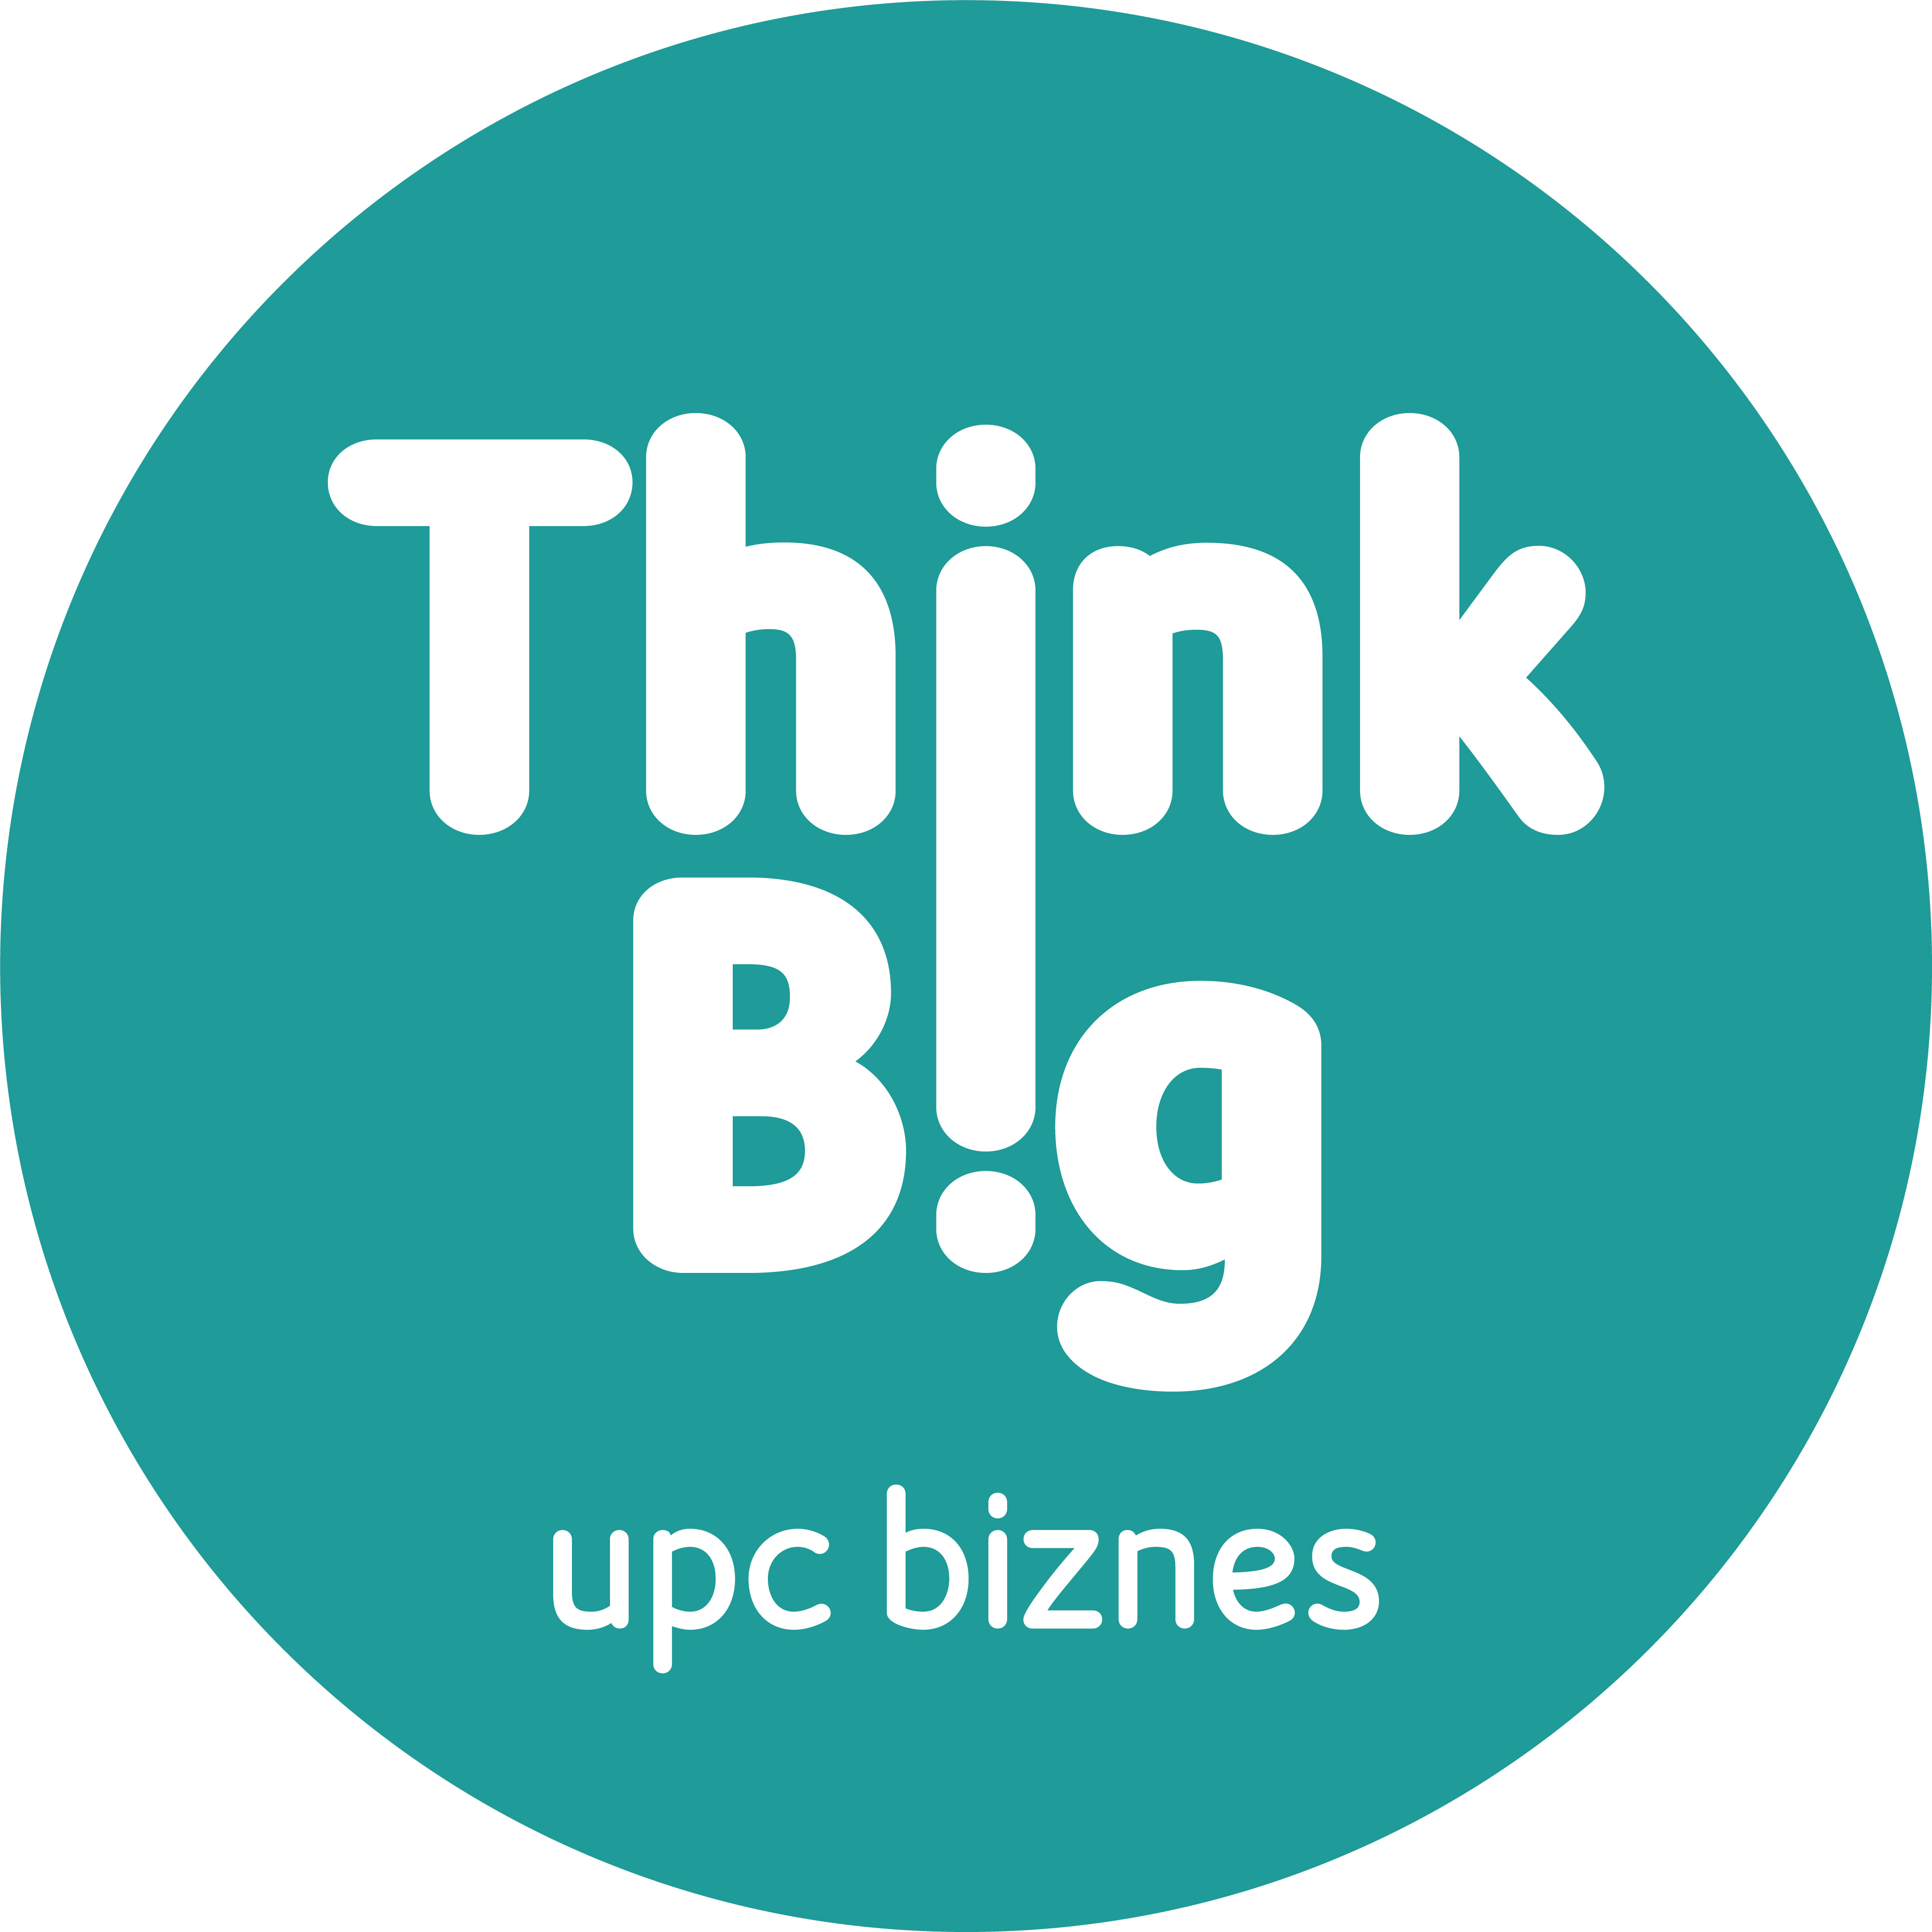 Untill 31 January SMEs from Central and Eastern Europe can apply for the Think Big Programme.